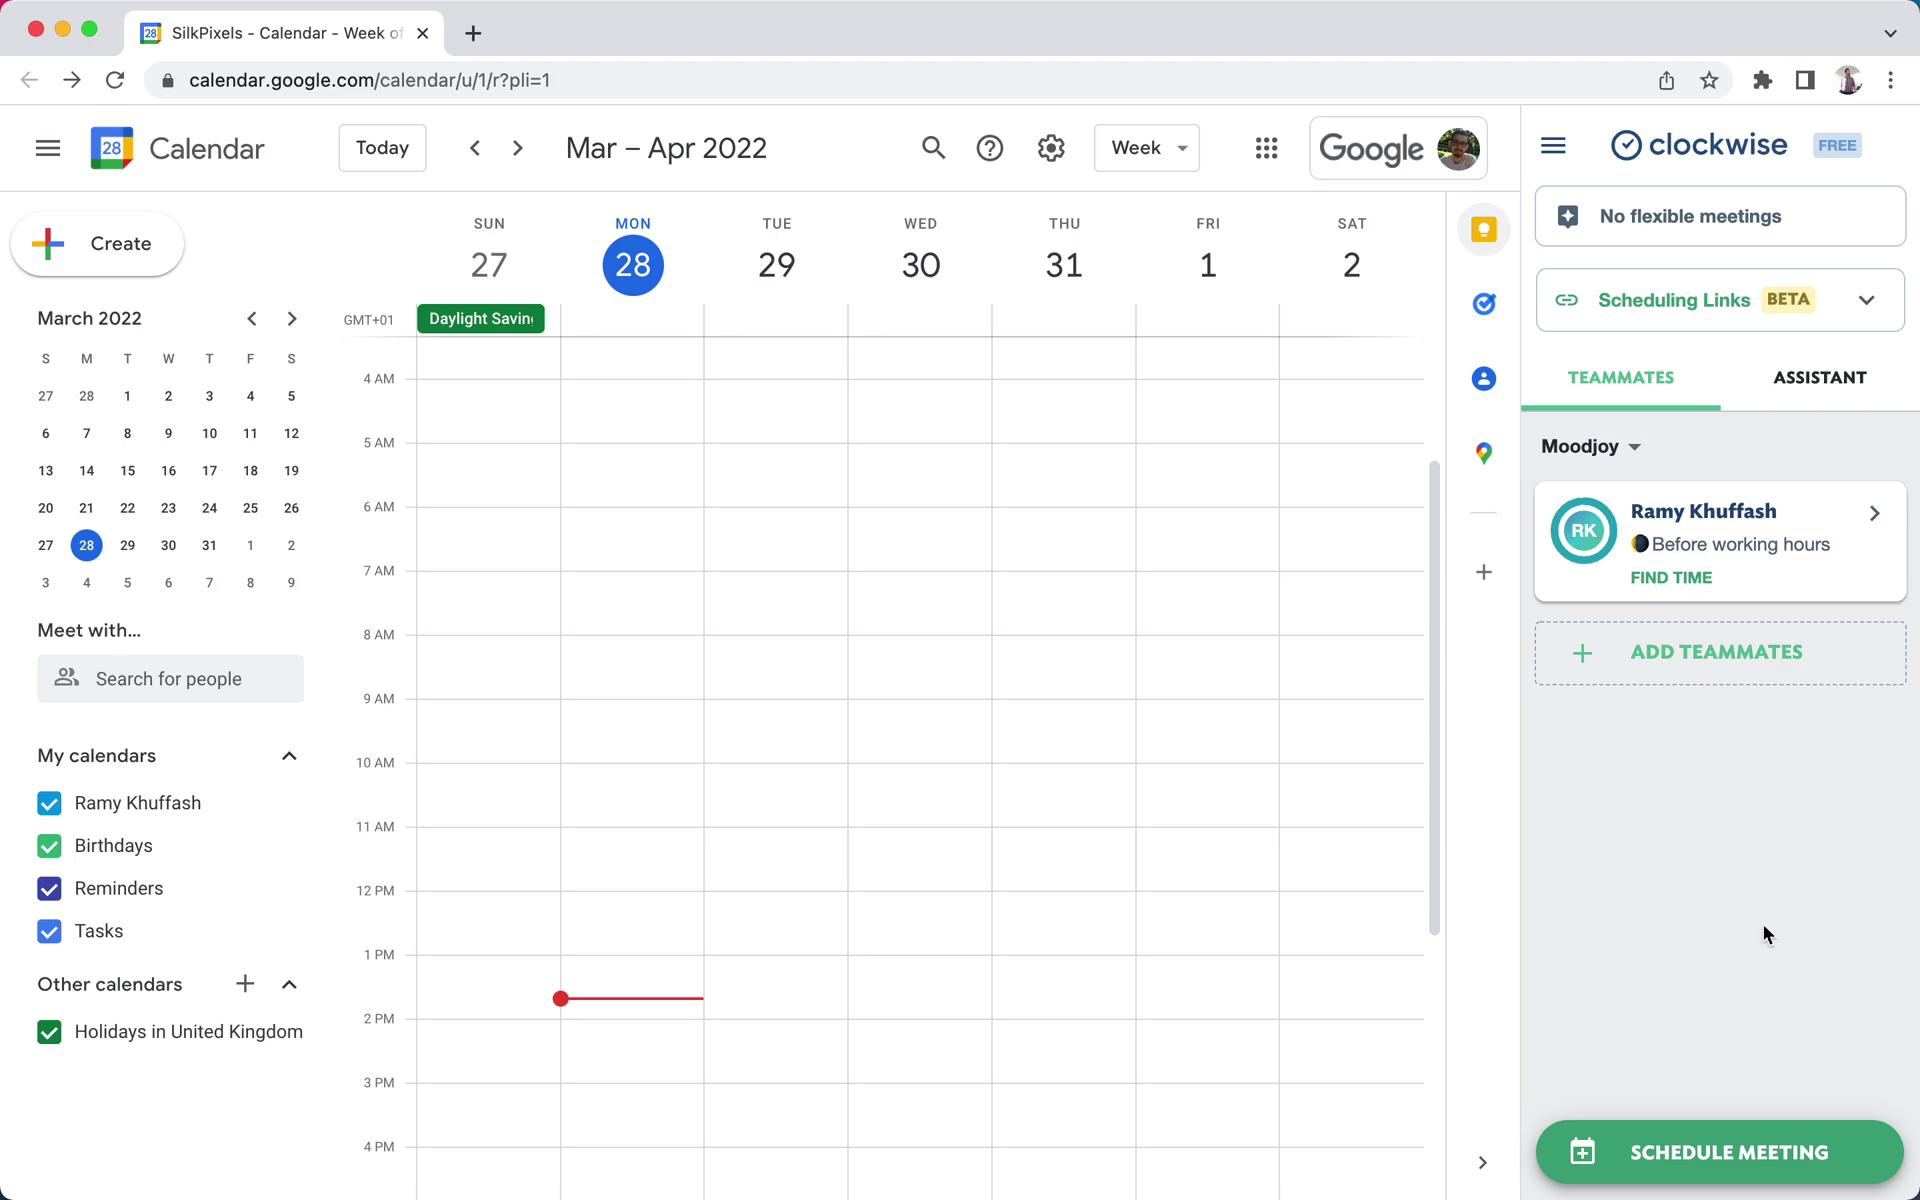 Screenshot of Scheduling a meeting on Clockwise